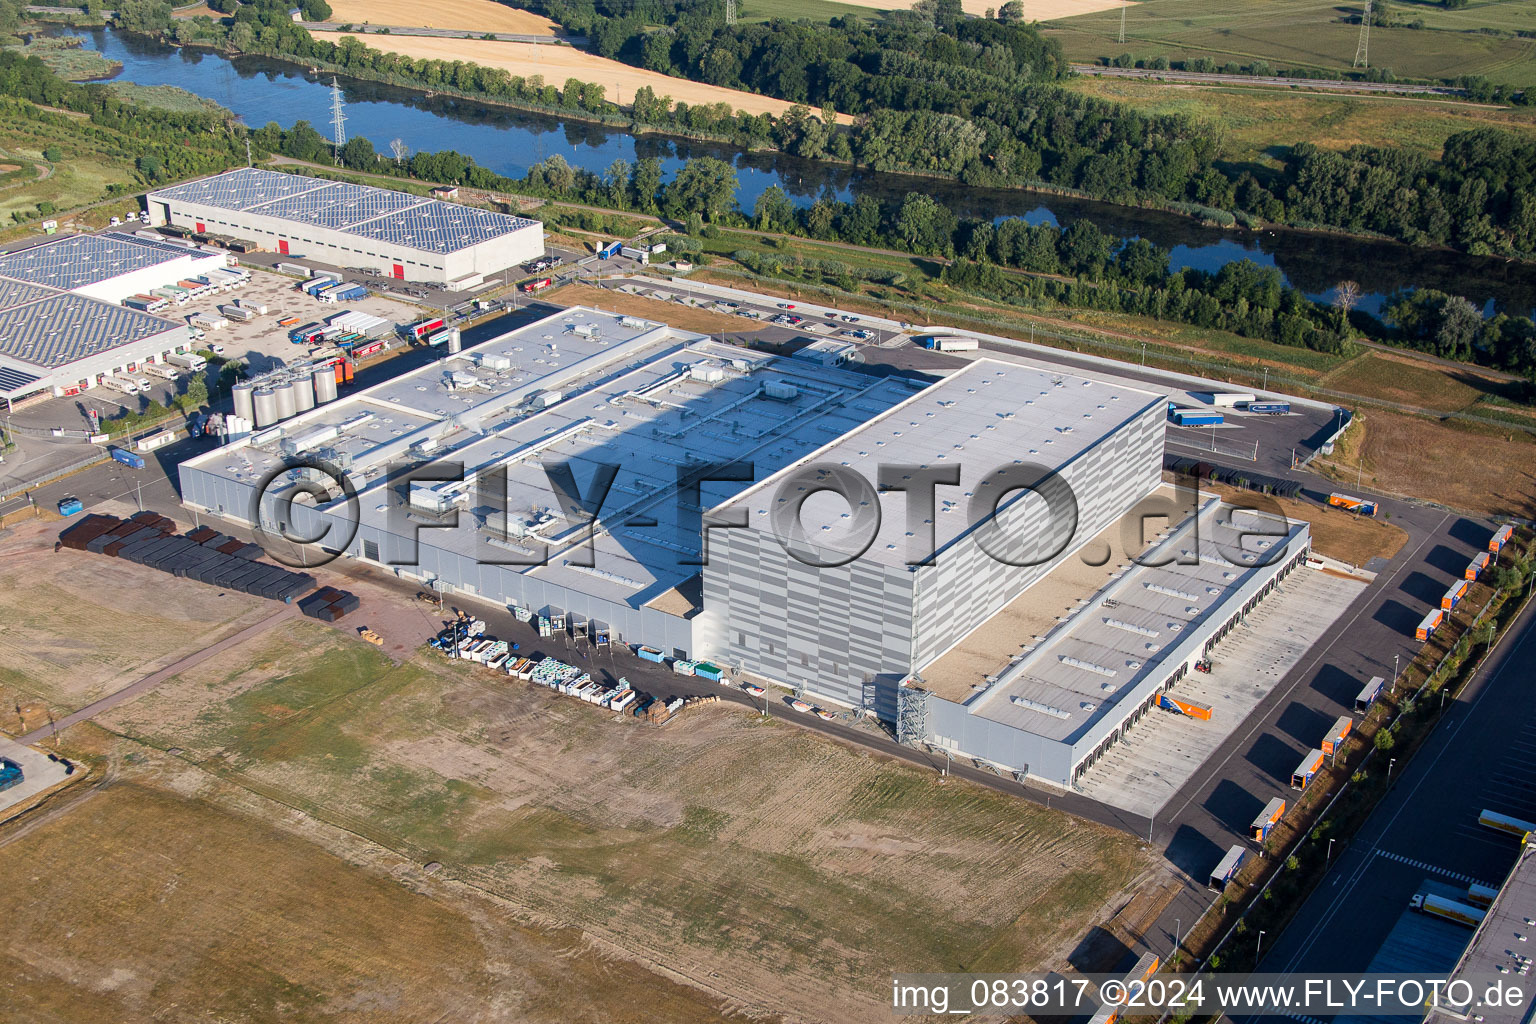 Building and production halls on the premises of Pfaelzer Erfrischungsgetraenke GmbH in Woerth am Rhein in the state Rhineland-Palatinate, Germany